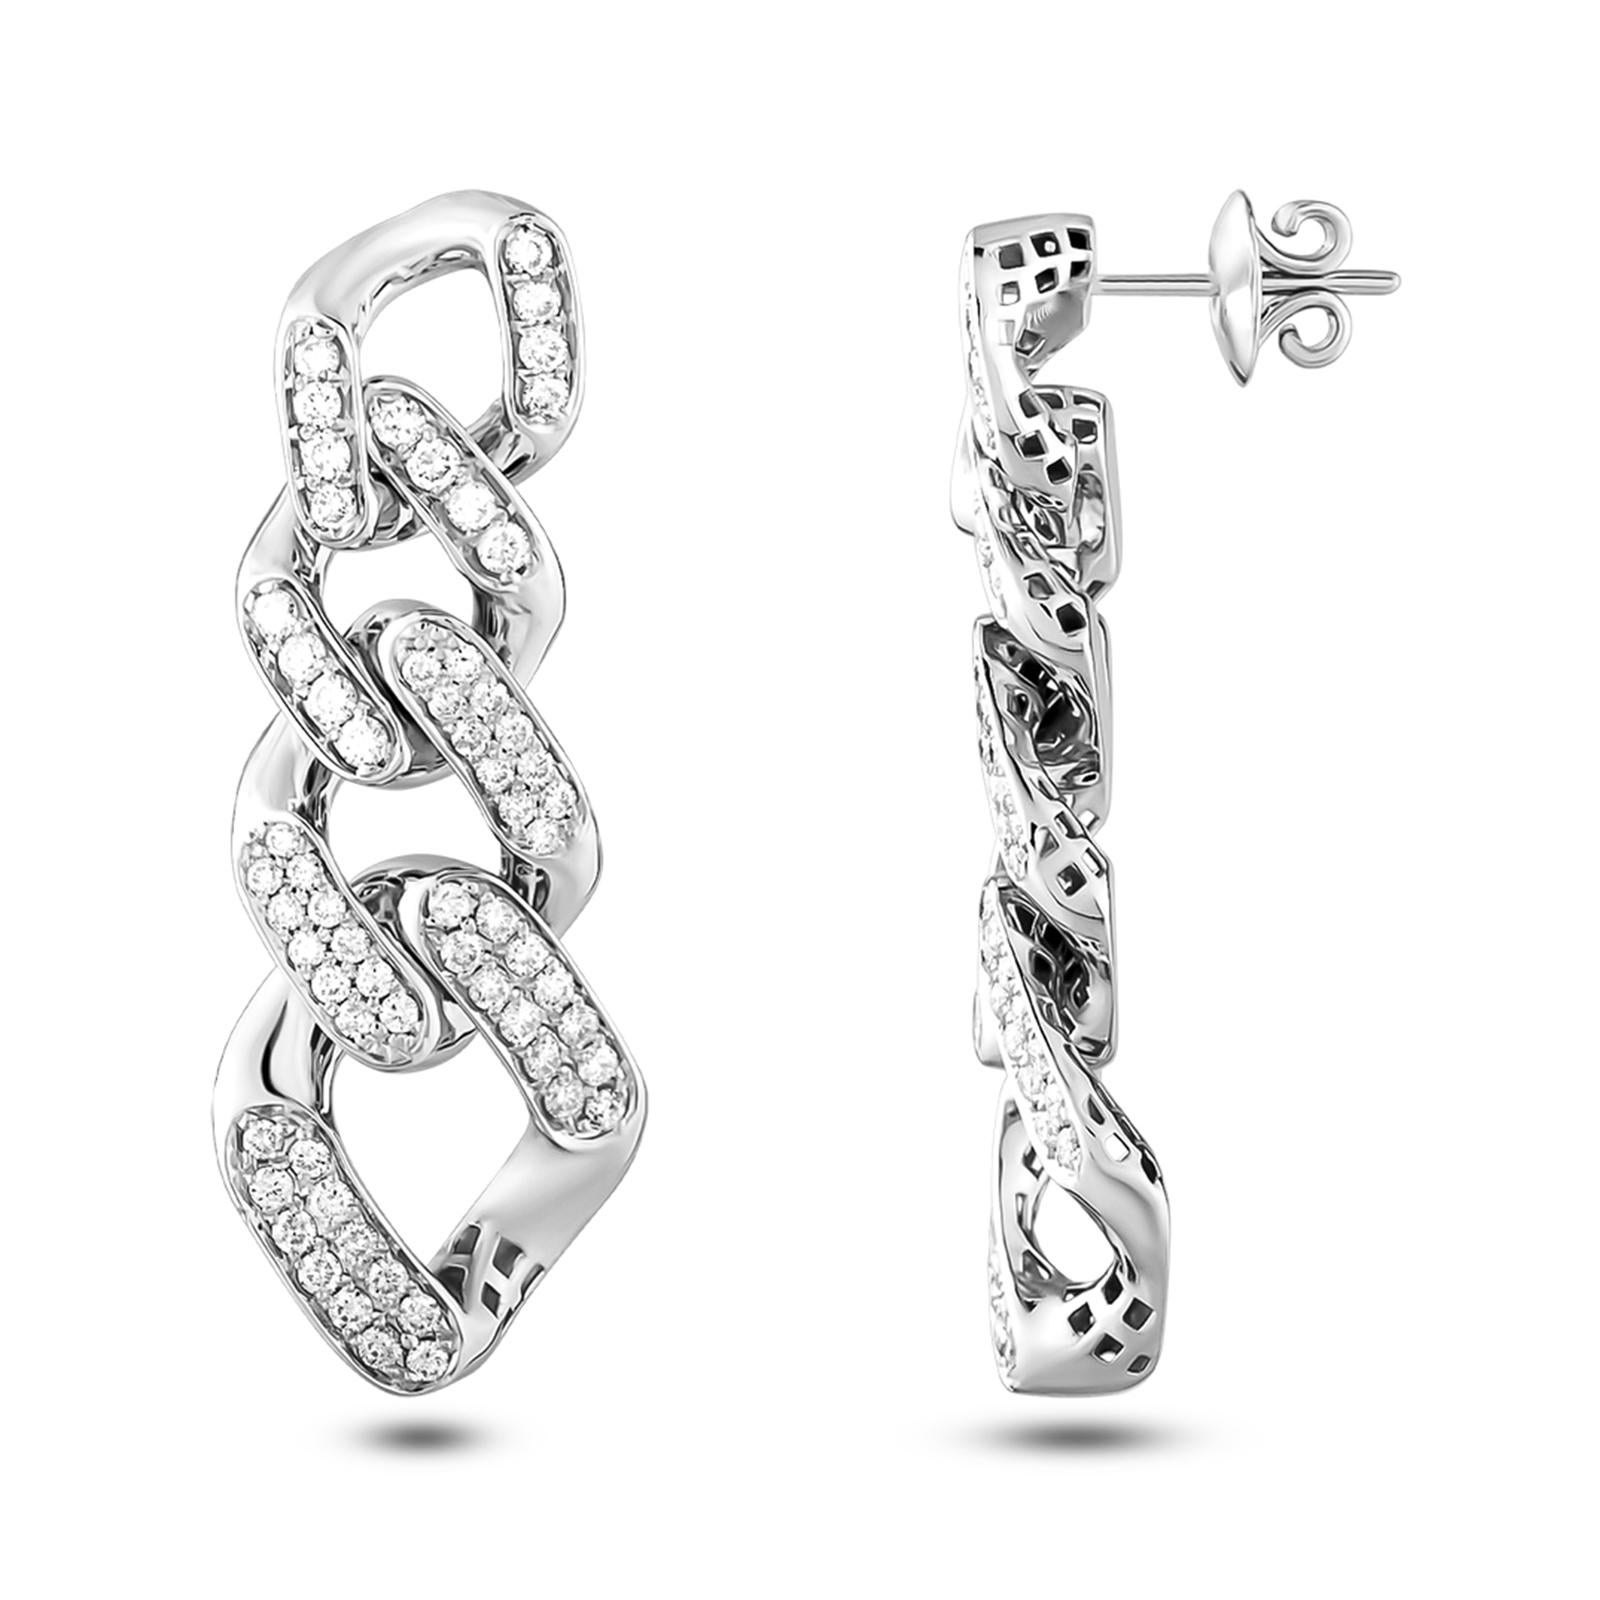 18k White Gold Diamond Cuban Link Chain Earrings.

There Is No Doubt That It Is Not Just A Trend, Cuban Link Chains Are Of A Superior, Long-Lasting Design, And They Are To Stay.

18 Karat White Gold 13.55gr.
Round White Diamonds 1.78 Carat E Color